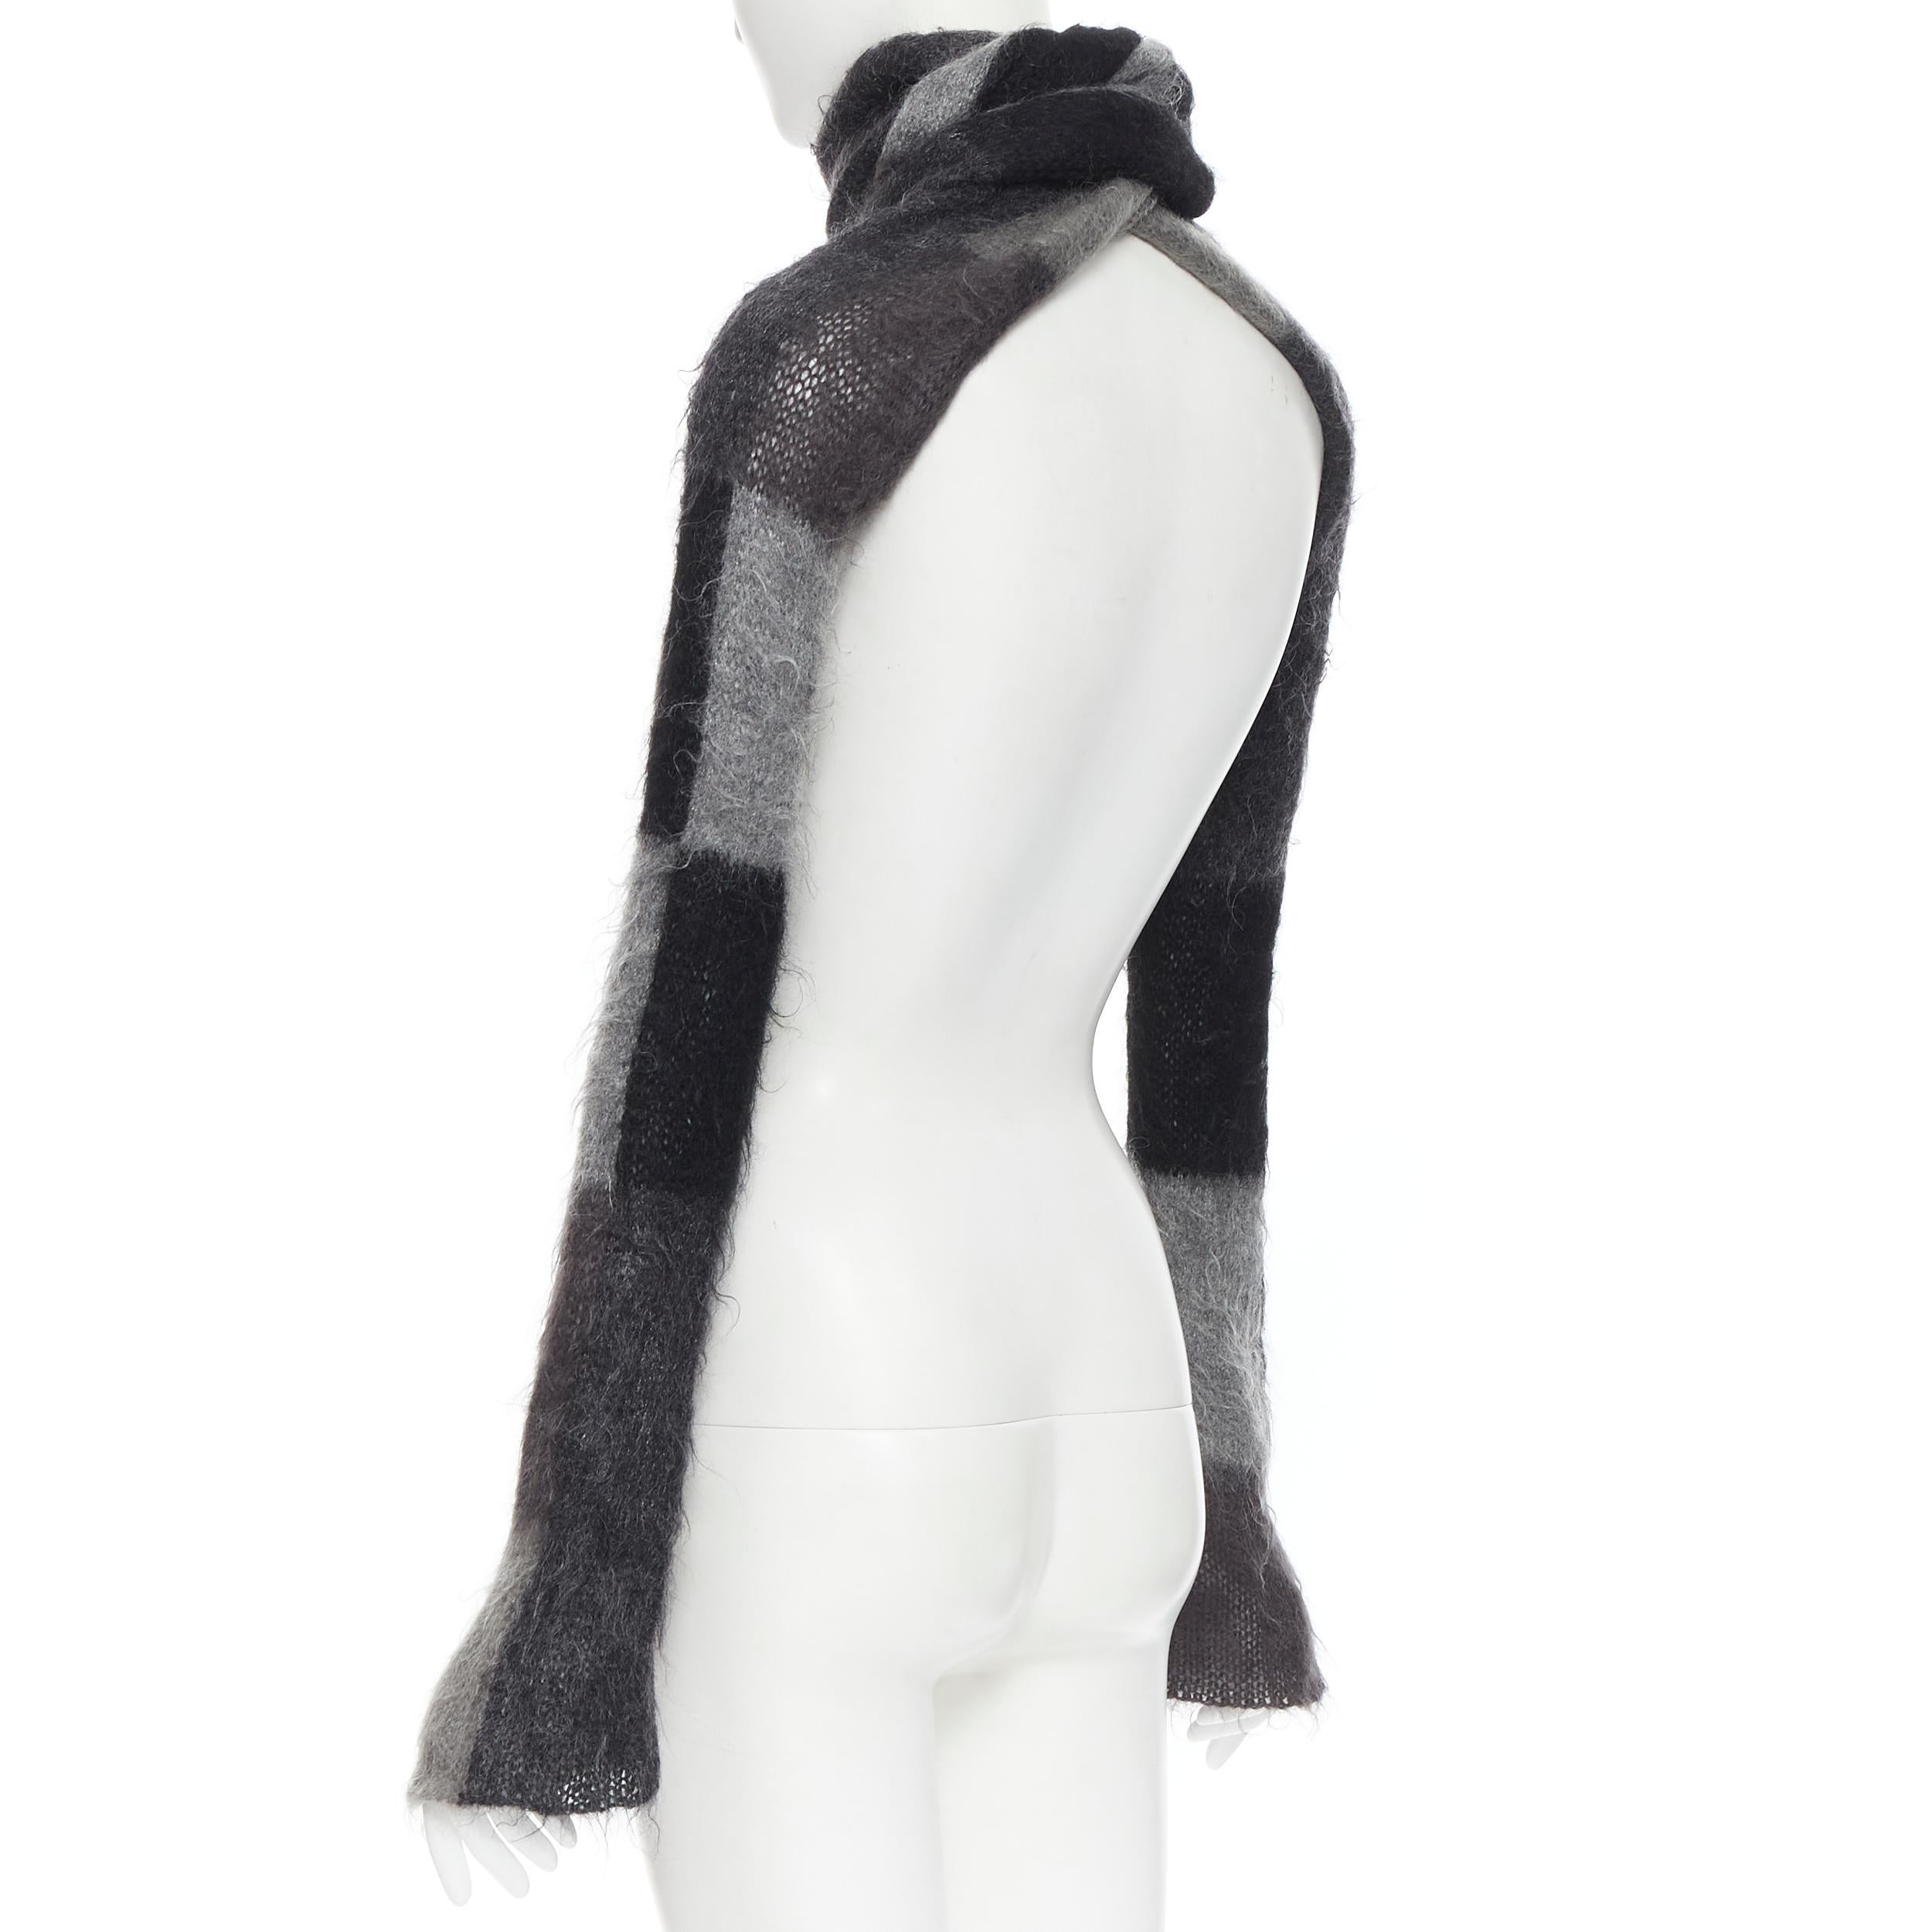 Black UNDERCOVER grey black check wool knit fingerless glove extra long scarf